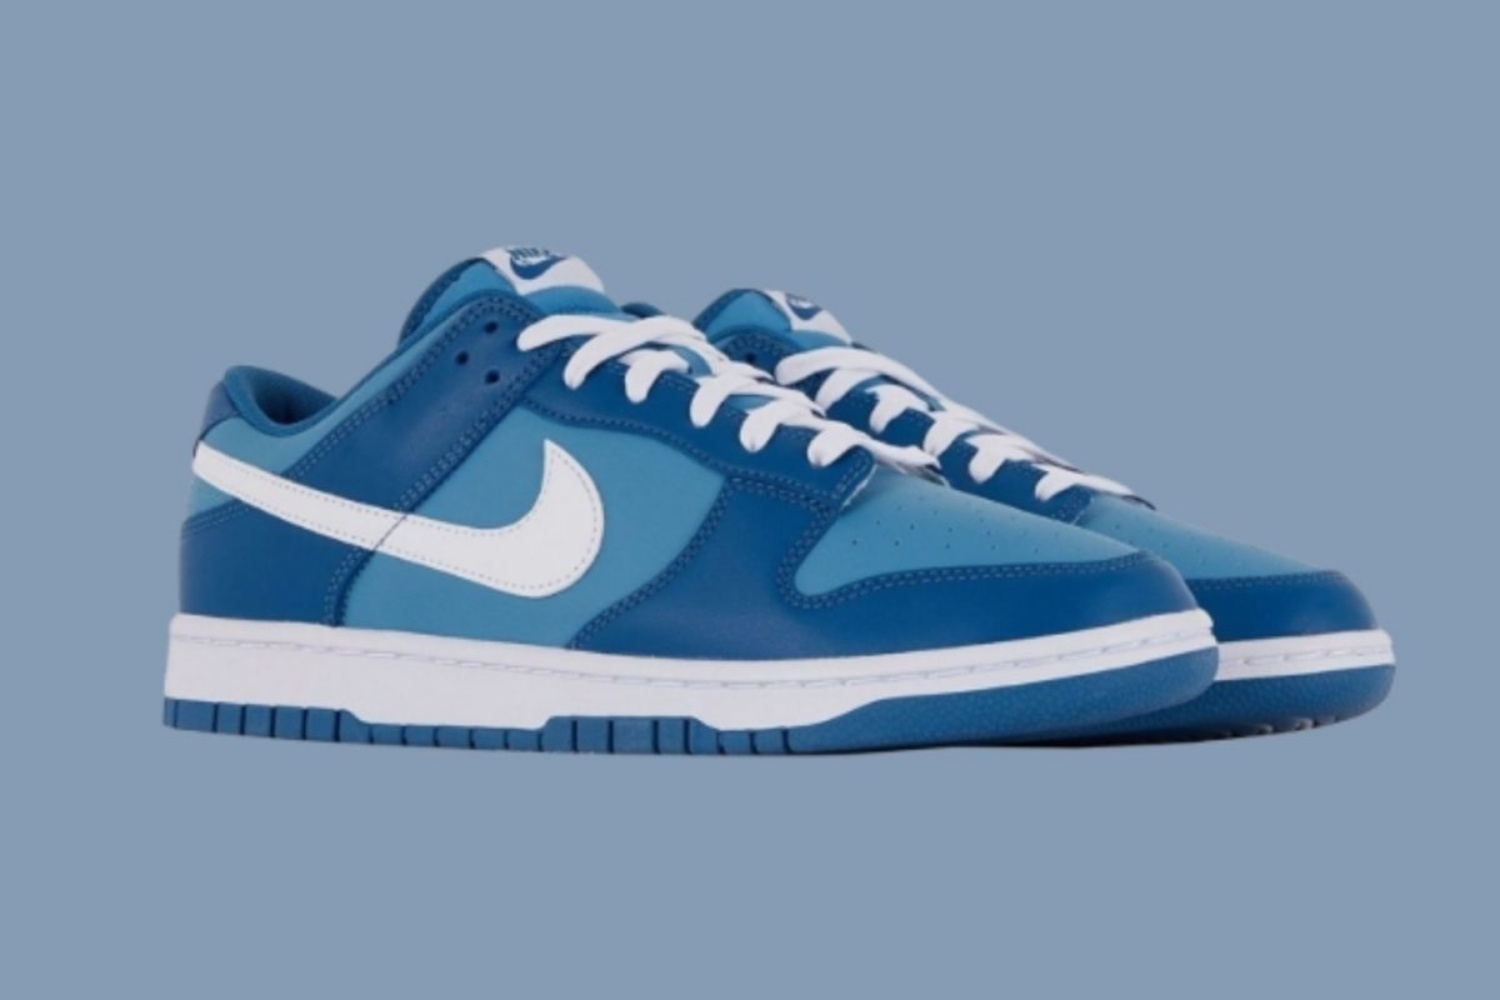 The Nike Dunk Low gets a 'Reverse Argon' colorway